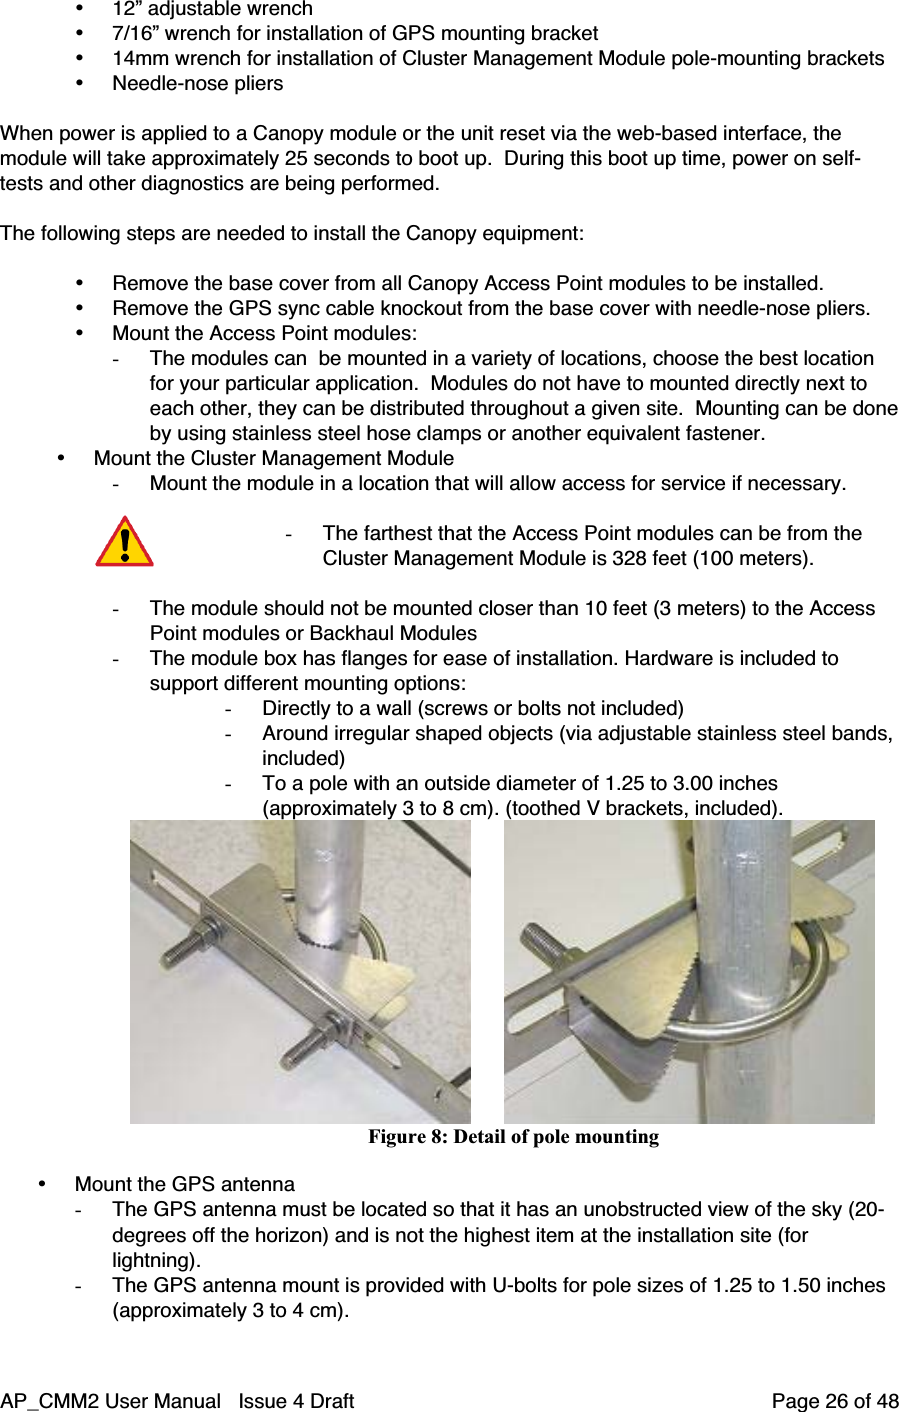 AP_CMM2 User Manual   Issue 4 Draft         Page 26 of 48• 12” adjustable wrench• 7/16” wrench for installation of GPS mounting bracket• 14mm wrench for installation of Cluster Management Module pole-mounting brackets• Needle-nose pliersWhen power is applied to a Canopy module or the unit reset via the web-based interface, themodule will take approximately 25 seconds to boot up.  During this boot up time, power on self-tests and other diagnostics are being performed.The following steps are needed to install the Canopy equipment:• Remove the base cover from all Canopy Access Point modules to be installed.• Remove the GPS sync cable knockout from the base cover with needle-nose pliers.• Mount the Access Point modules:- The modules can  be mounted in a variety of locations, choose the best locationfor your particular application.  Modules do not have to mounted directly next toeach other, they can be distributed throughout a given site.  Mounting can be doneby using stainless steel hose clamps or another equivalent fastener.• Mount the Cluster Management Module- Mount the module in a location that will allow access for service if necessary.- The farthest that the Access Point modules can be from theCluster Management Module is 328 feet (100 meters).- The module should not be mounted closer than 10 feet (3 meters) to the AccessPoint modules or Backhaul Modules- The module box has flanges for ease of installation. Hardware is included tosupport different mounting options:- Directly to a wall (screws or bolts not included)- Around irregular shaped objects (via adjustable stainless steel bands,included)- To a pole with an outside diameter of 1.25 to 3.00 inches(approximately 3 to 8 cm). (toothed V brackets, included).                              Figure 8: Detail of pole mounting• Mount the GPS antenna- The GPS antenna must be located so that it has an unobstructed view of the sky (20-degrees off the horizon) and is not the highest item at the installation site (forlightning).- The GPS antenna mount is provided with U-bolts for pole sizes of 1.25 to 1.50 inches(approximately 3 to 4 cm).